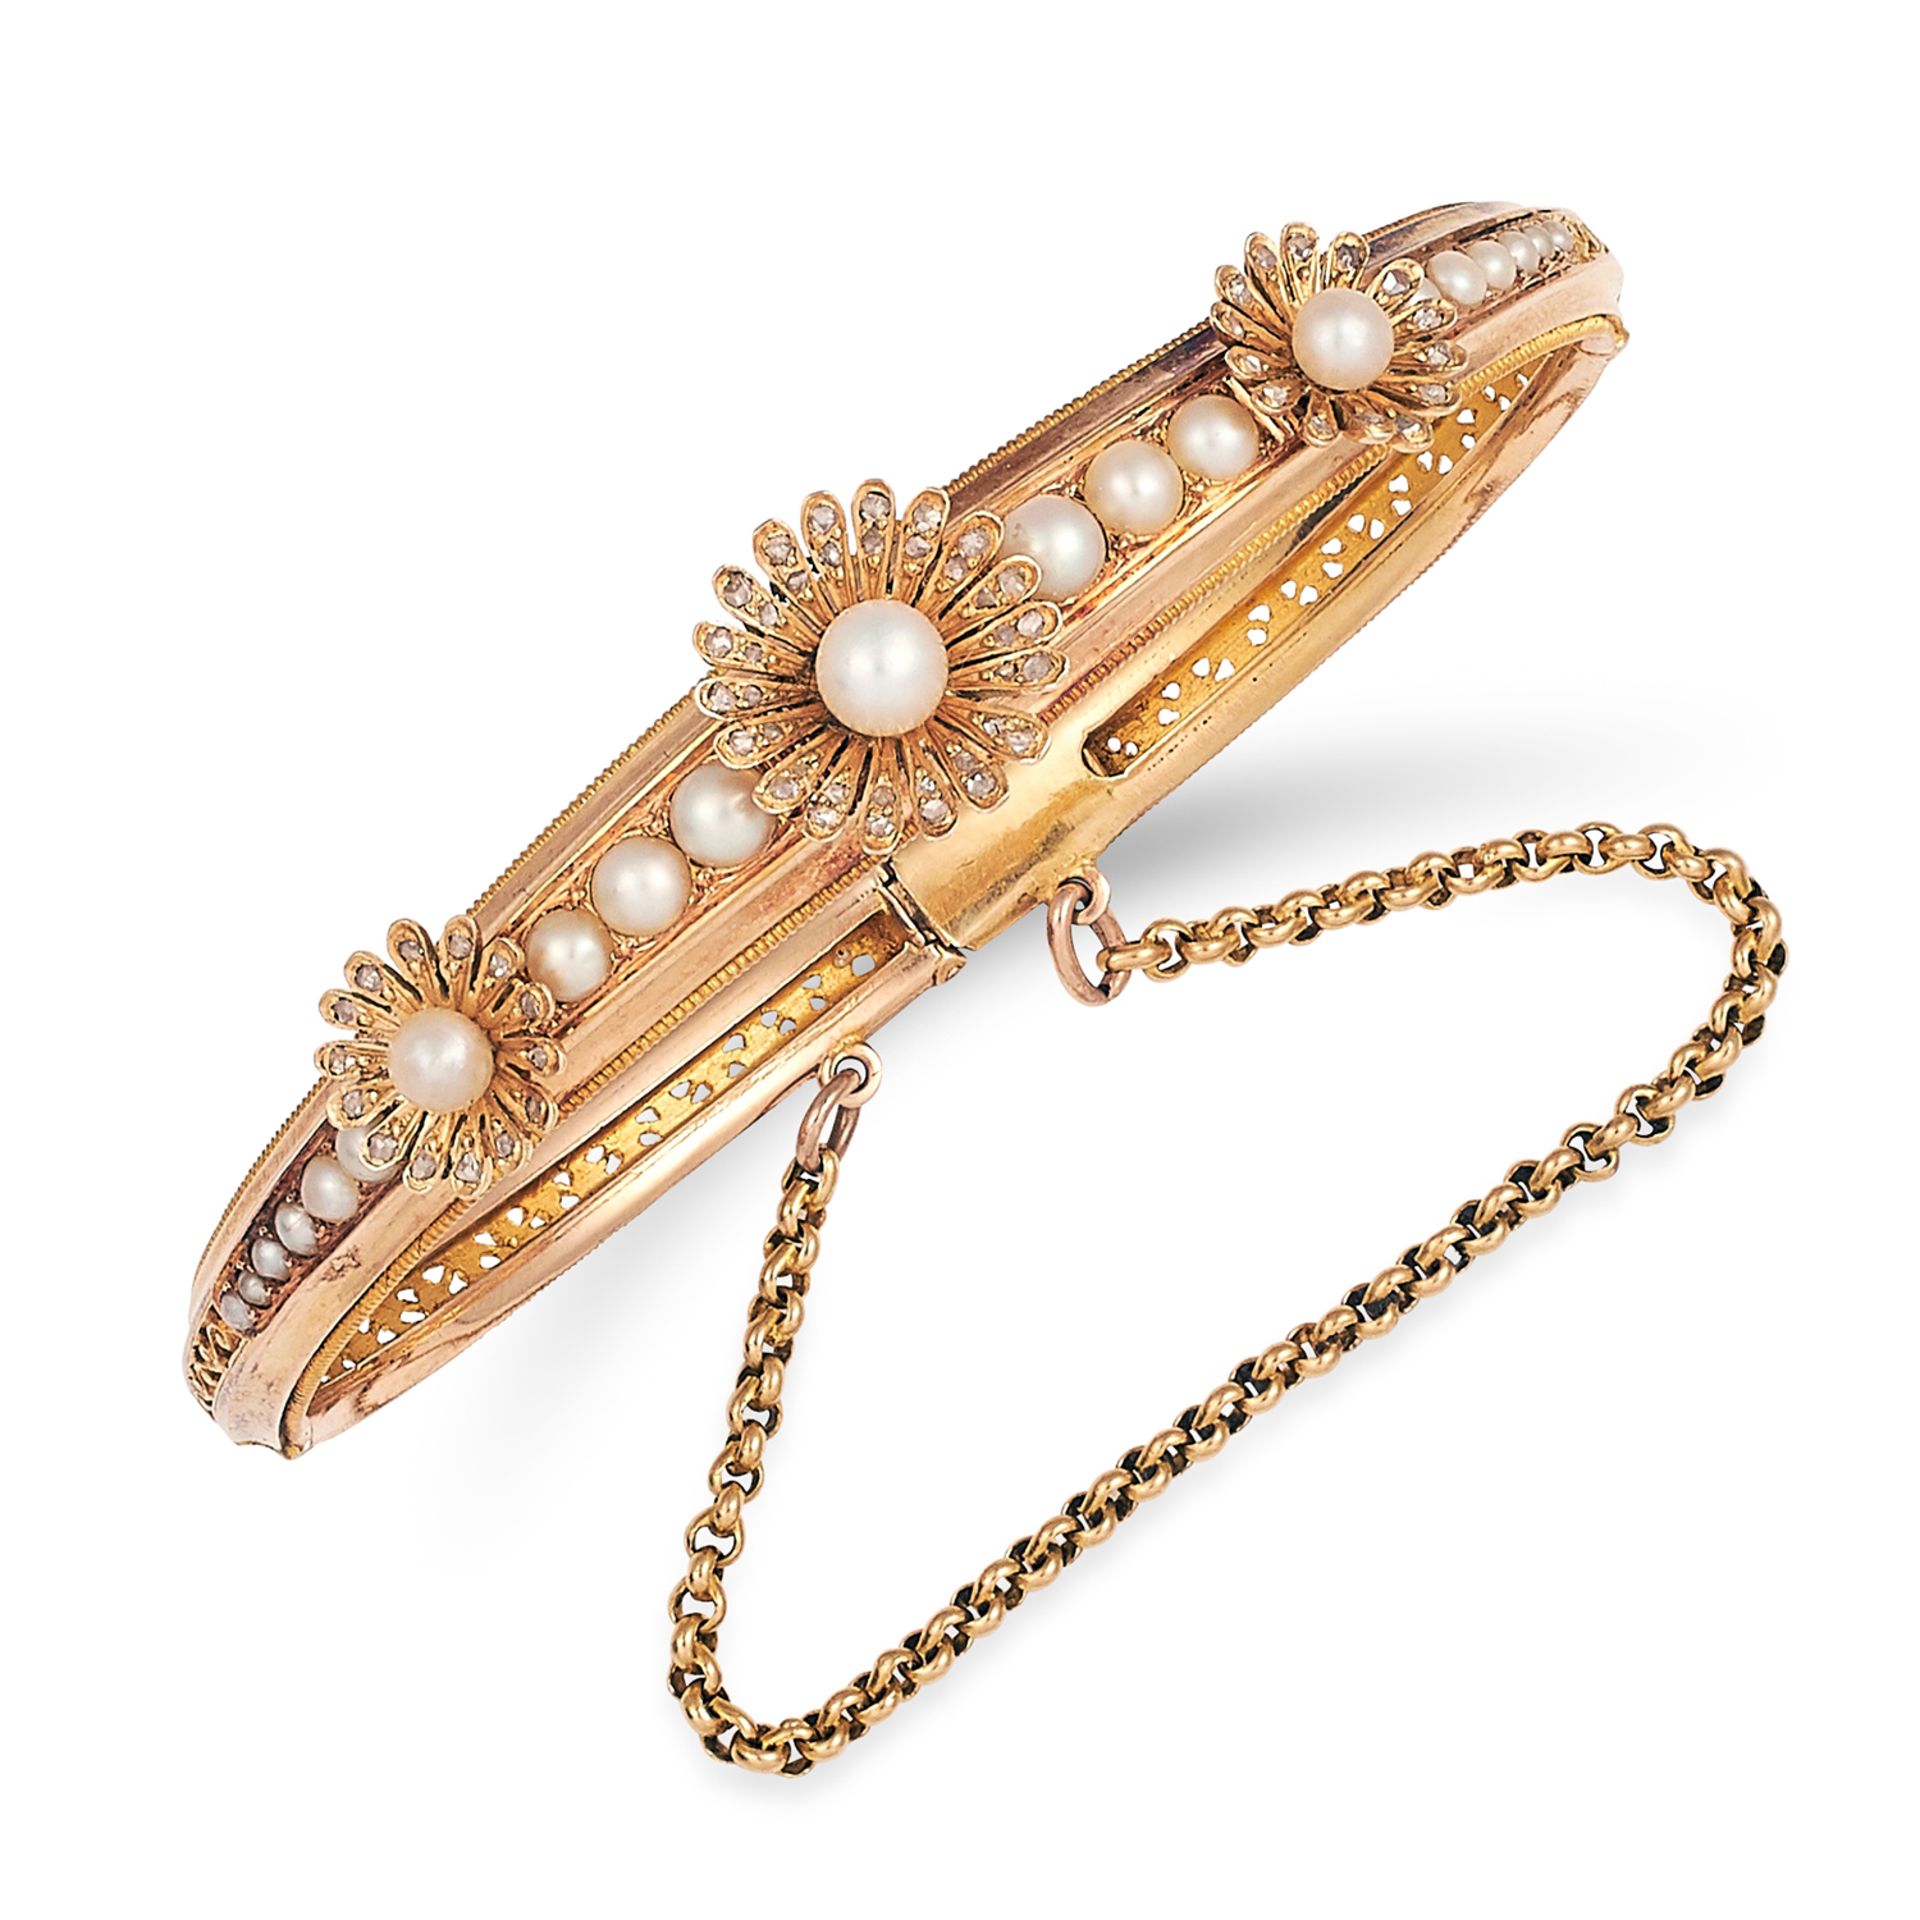 ANTIQUE VICTORIAN SEED PEARL AND DIAMOND BANGLE in high carat yellow gold, in foliate motif set with